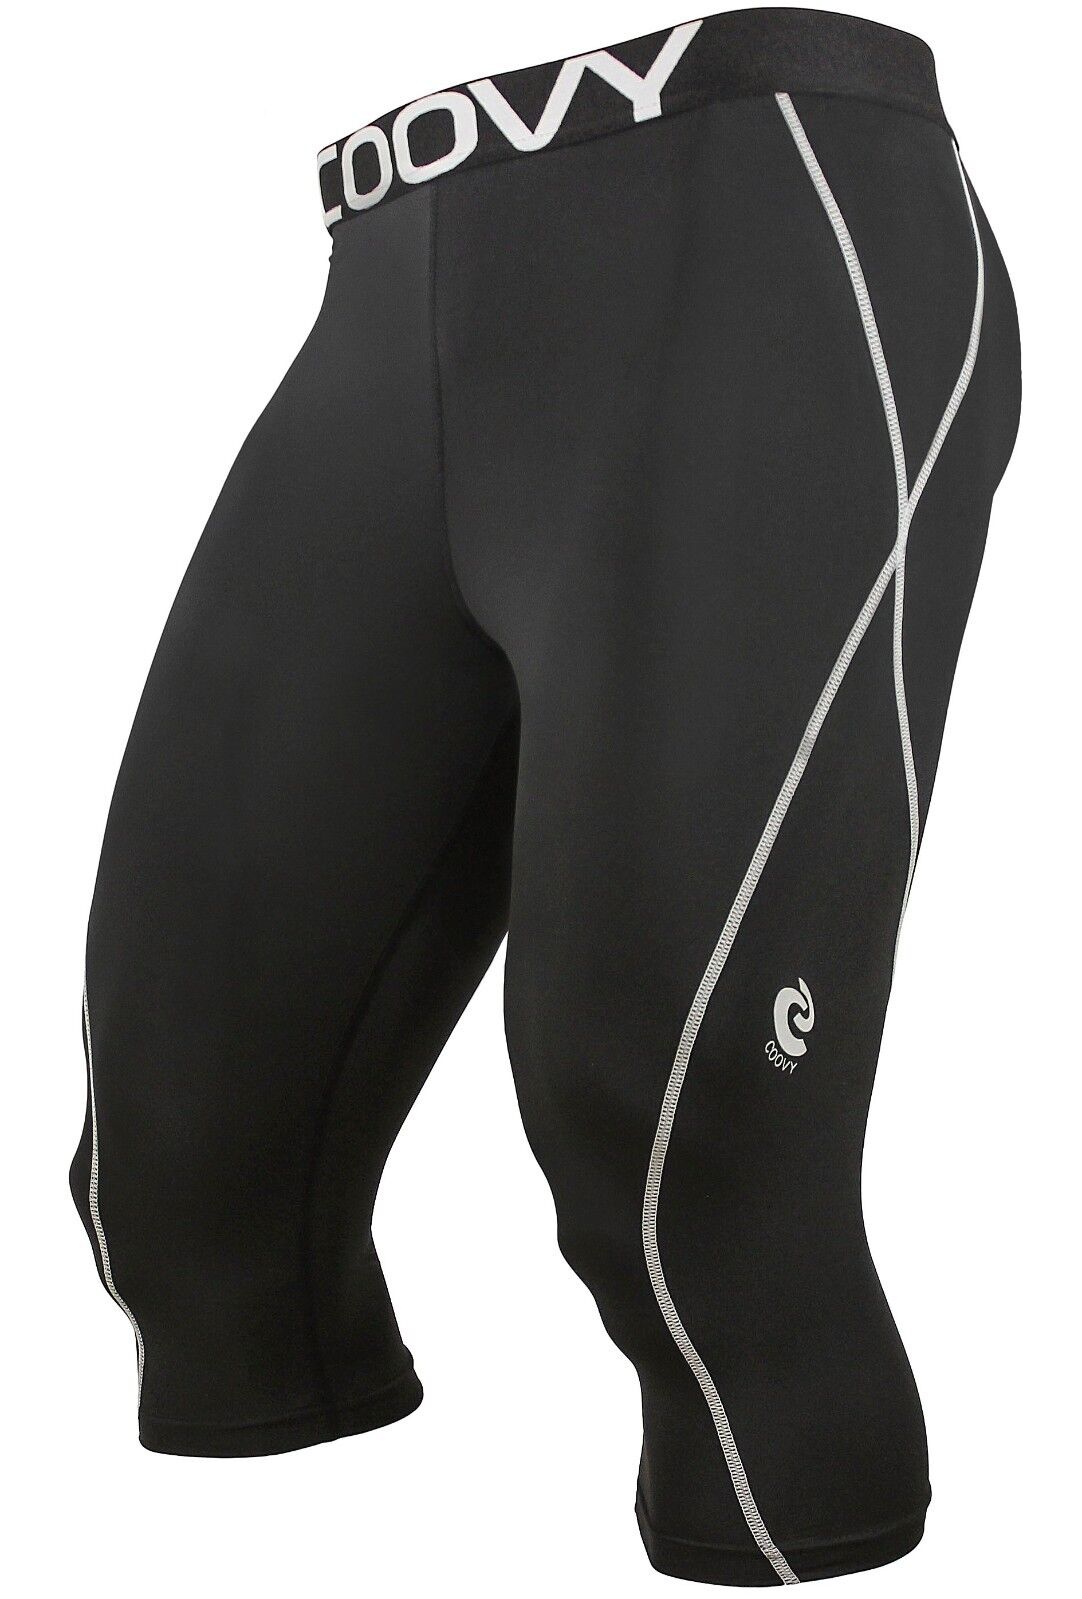 Type & Color:N056 Midweight Black 3/4 Tights:Mens COOVY Compression Under Base Layer Sports Armour Short Tights Running pants